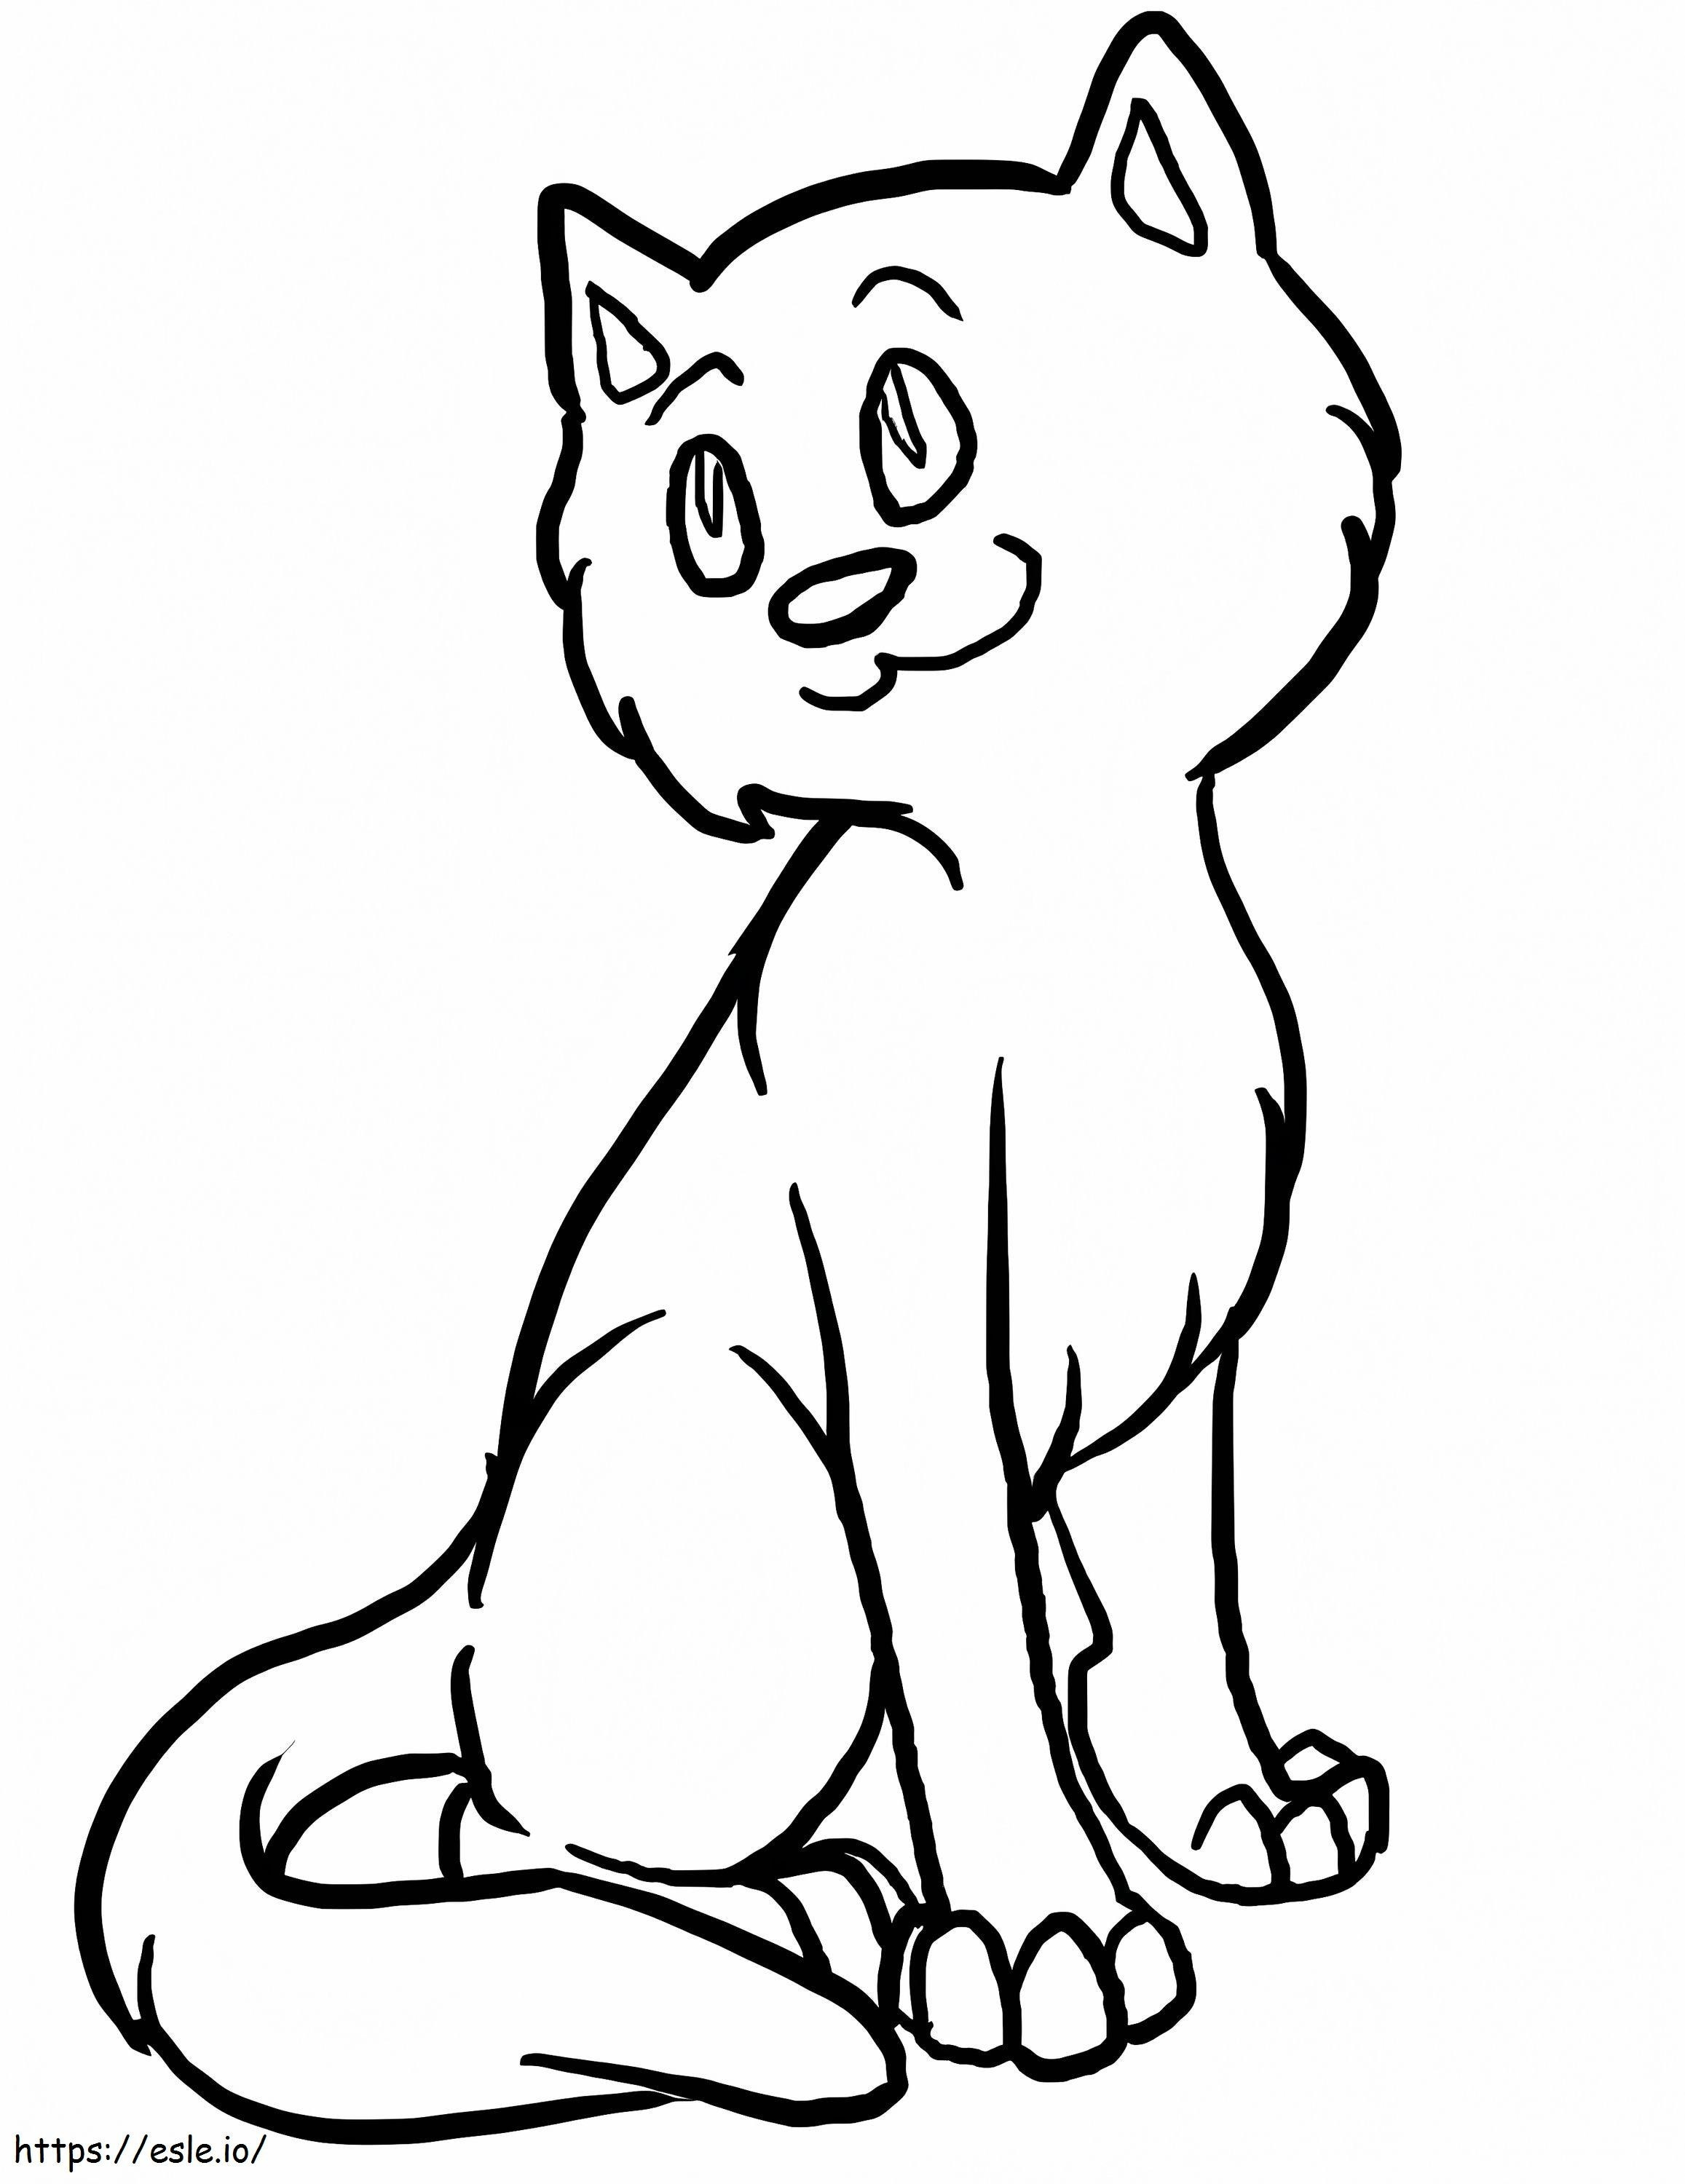 Lovely Cat coloring page